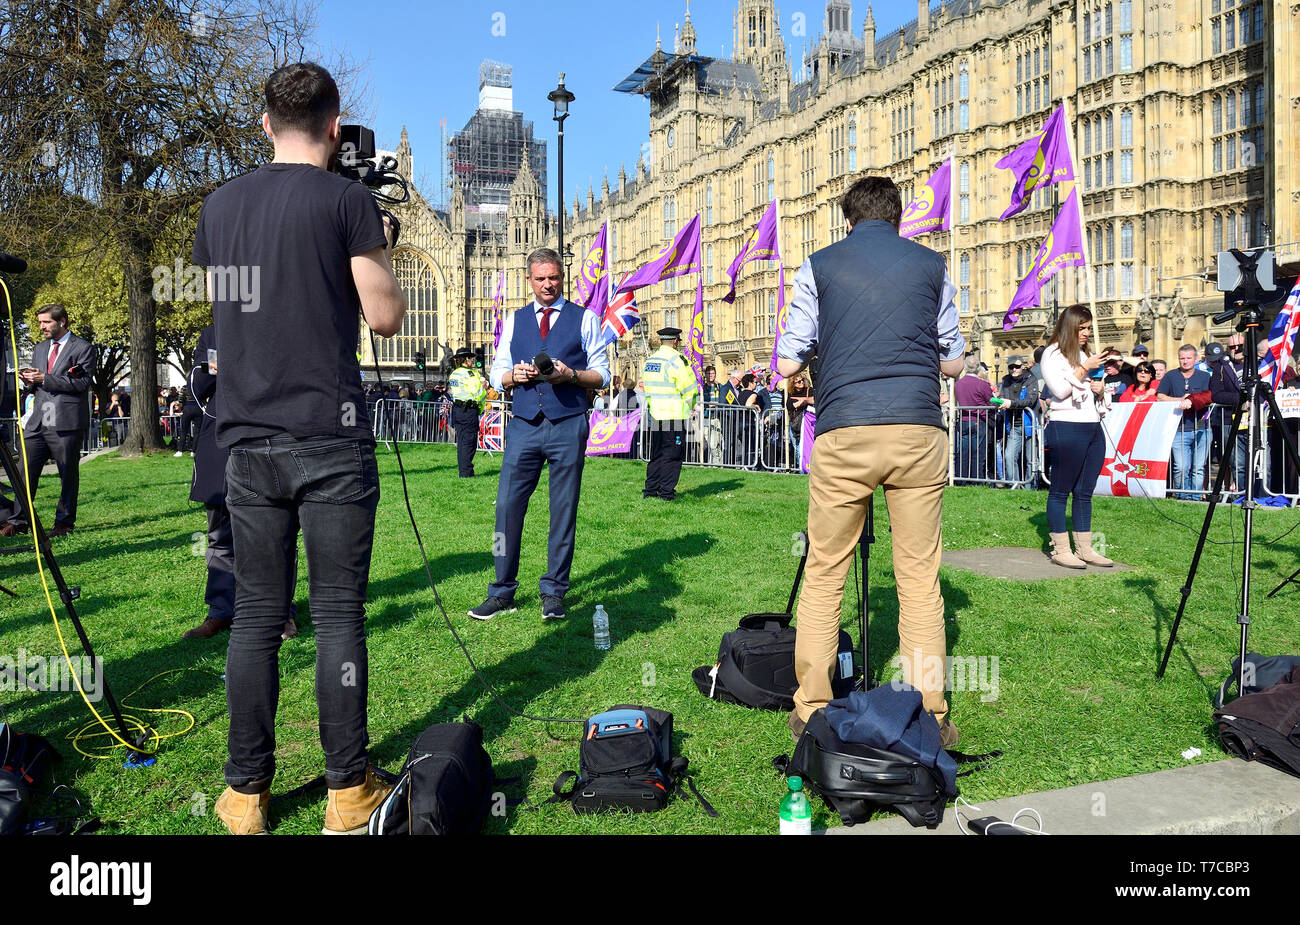 London, England, UK. Foreign TV reporters on College Green / Abingdon Street Gardens, during Brexit debates, March 2019. Stock Photo